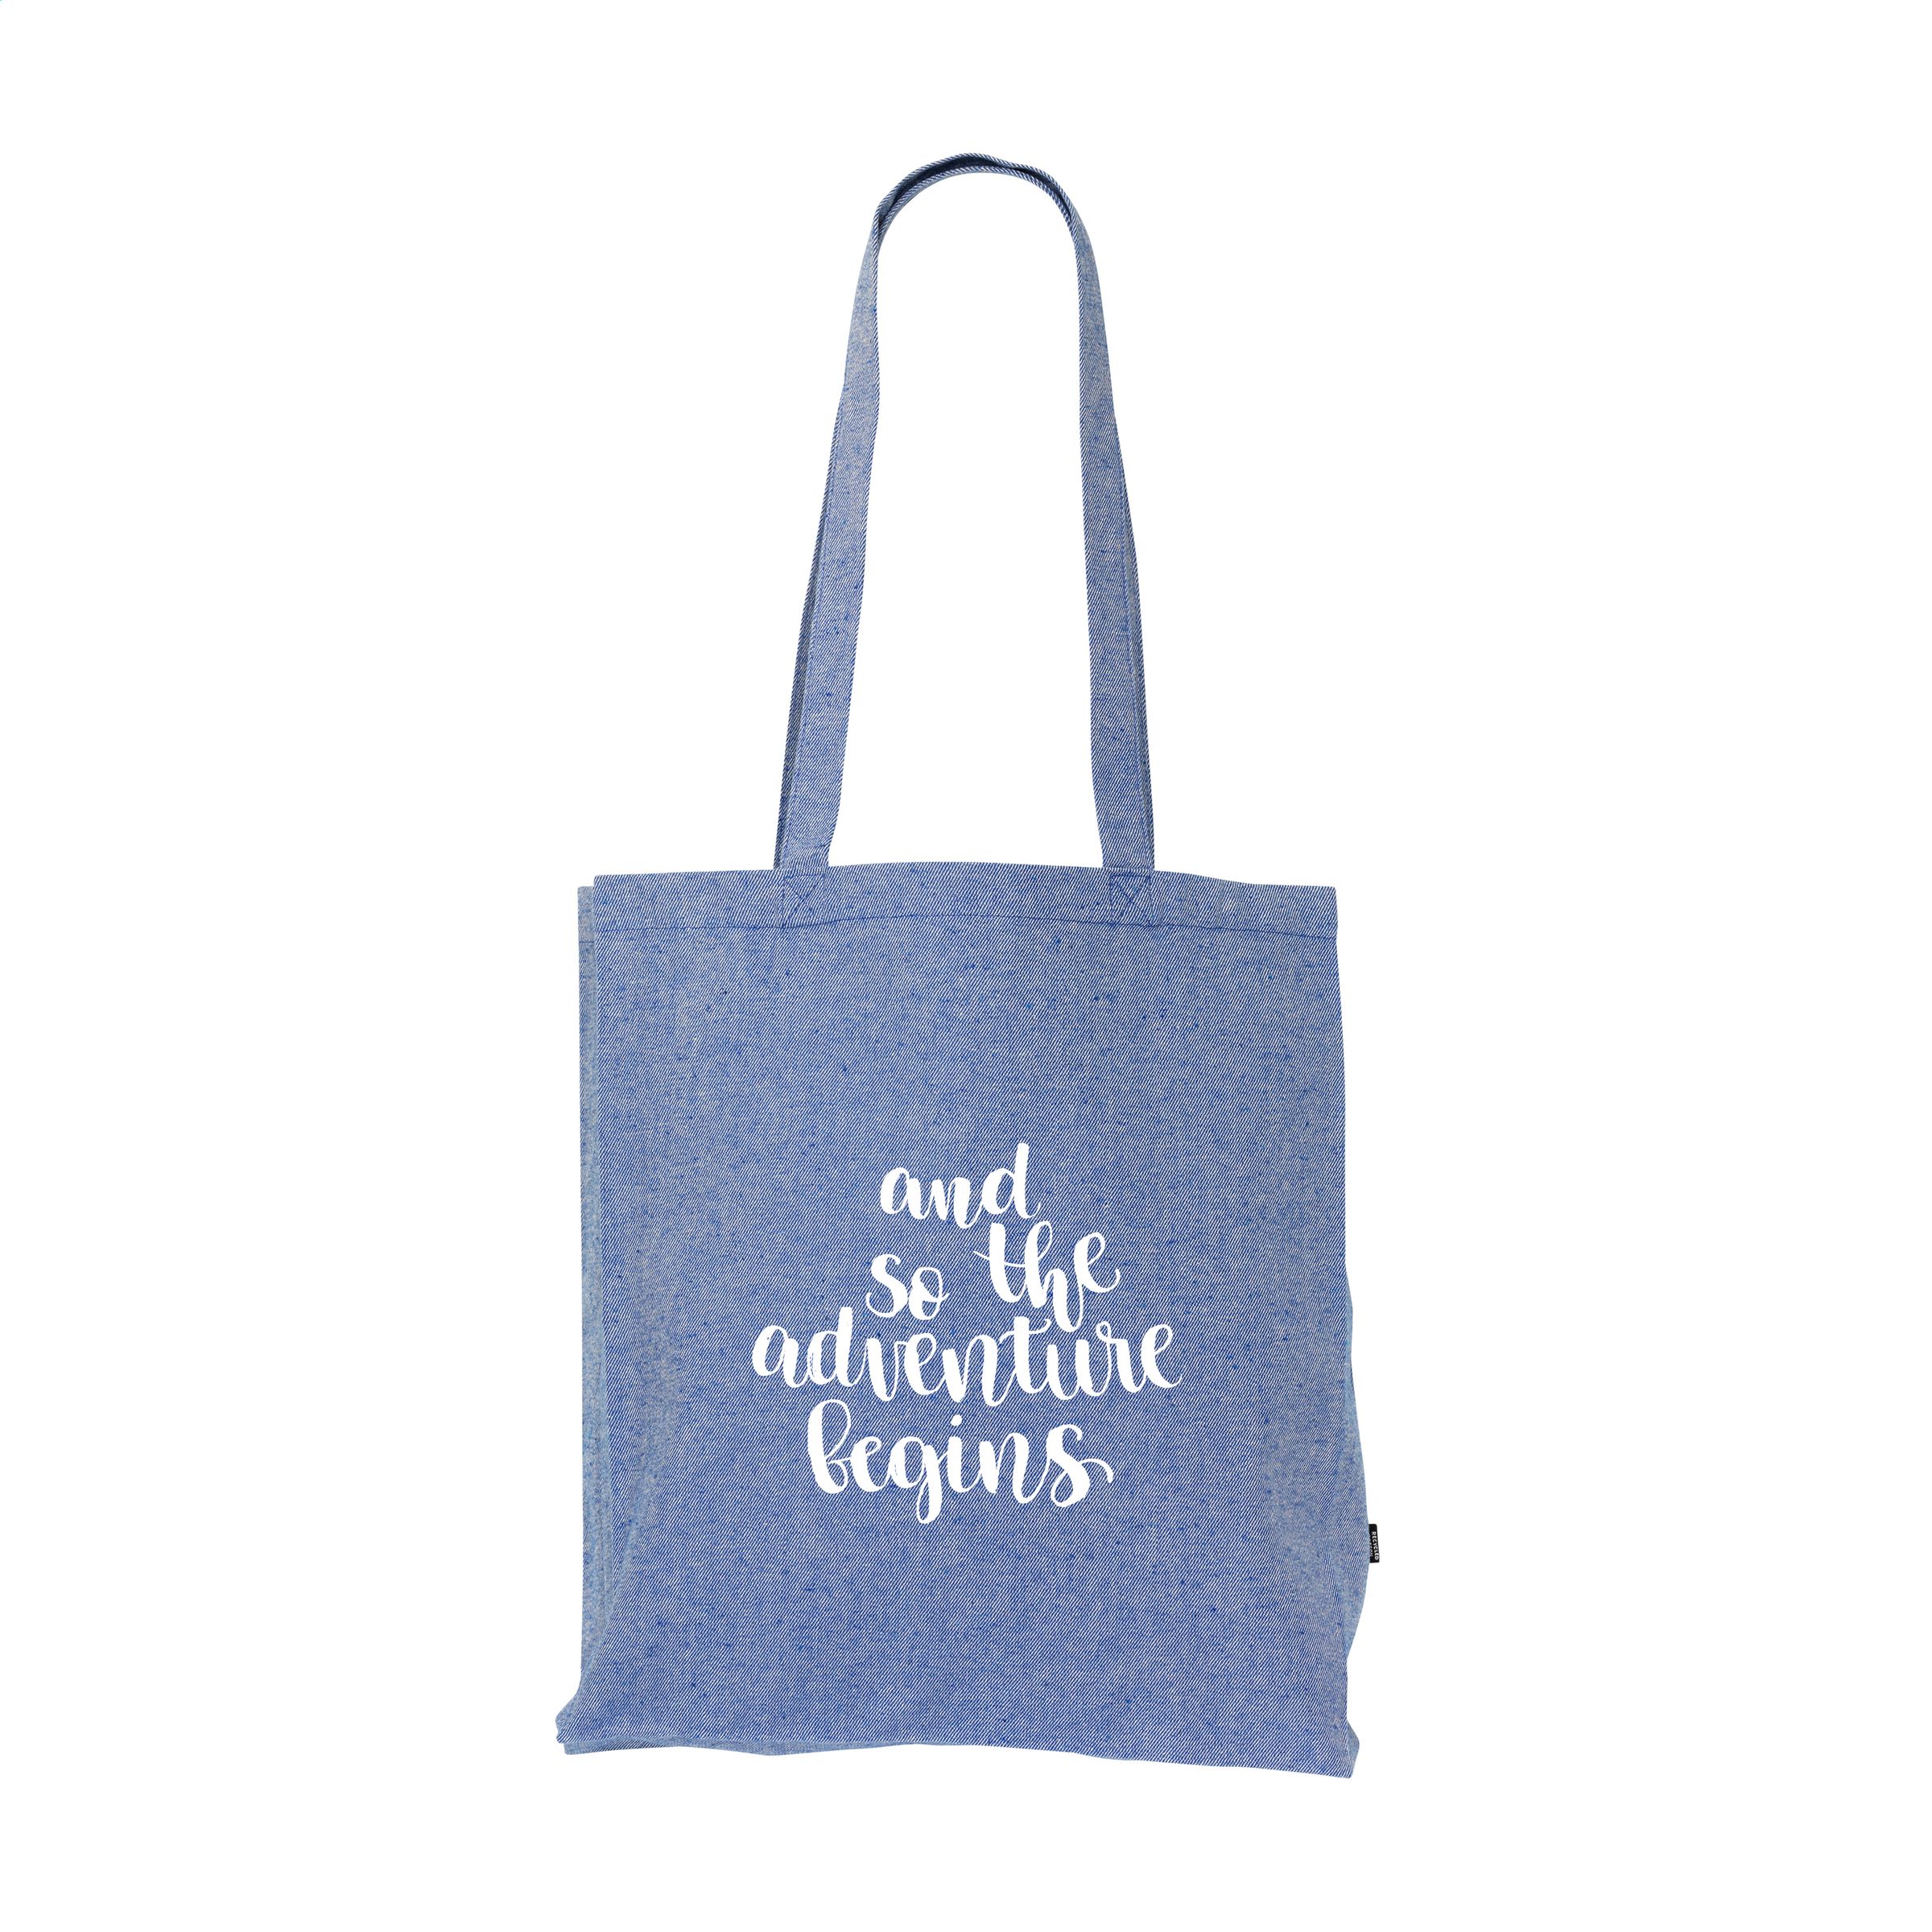 ECO Recycled Cotton Canvas Shopping Bag - Beaumont Leys